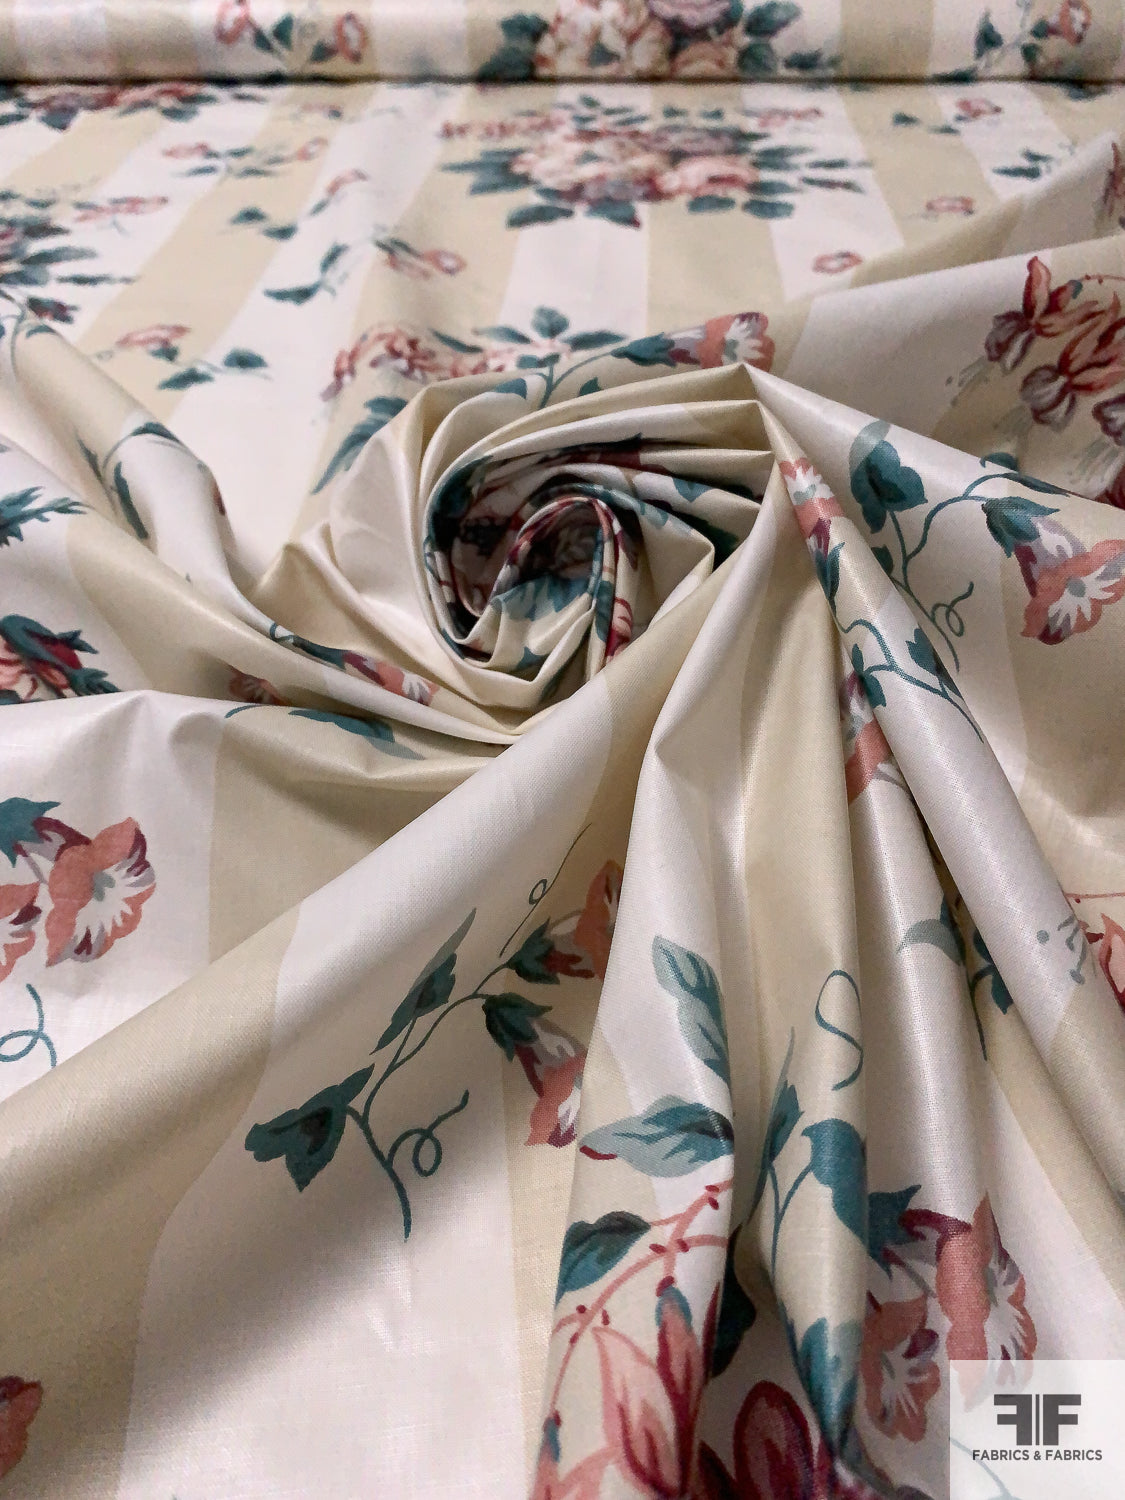 Floral Bouquets and Striped Printed Cotton Chintz - Dusty Teal / Dusty Rose / Beige / Off-White